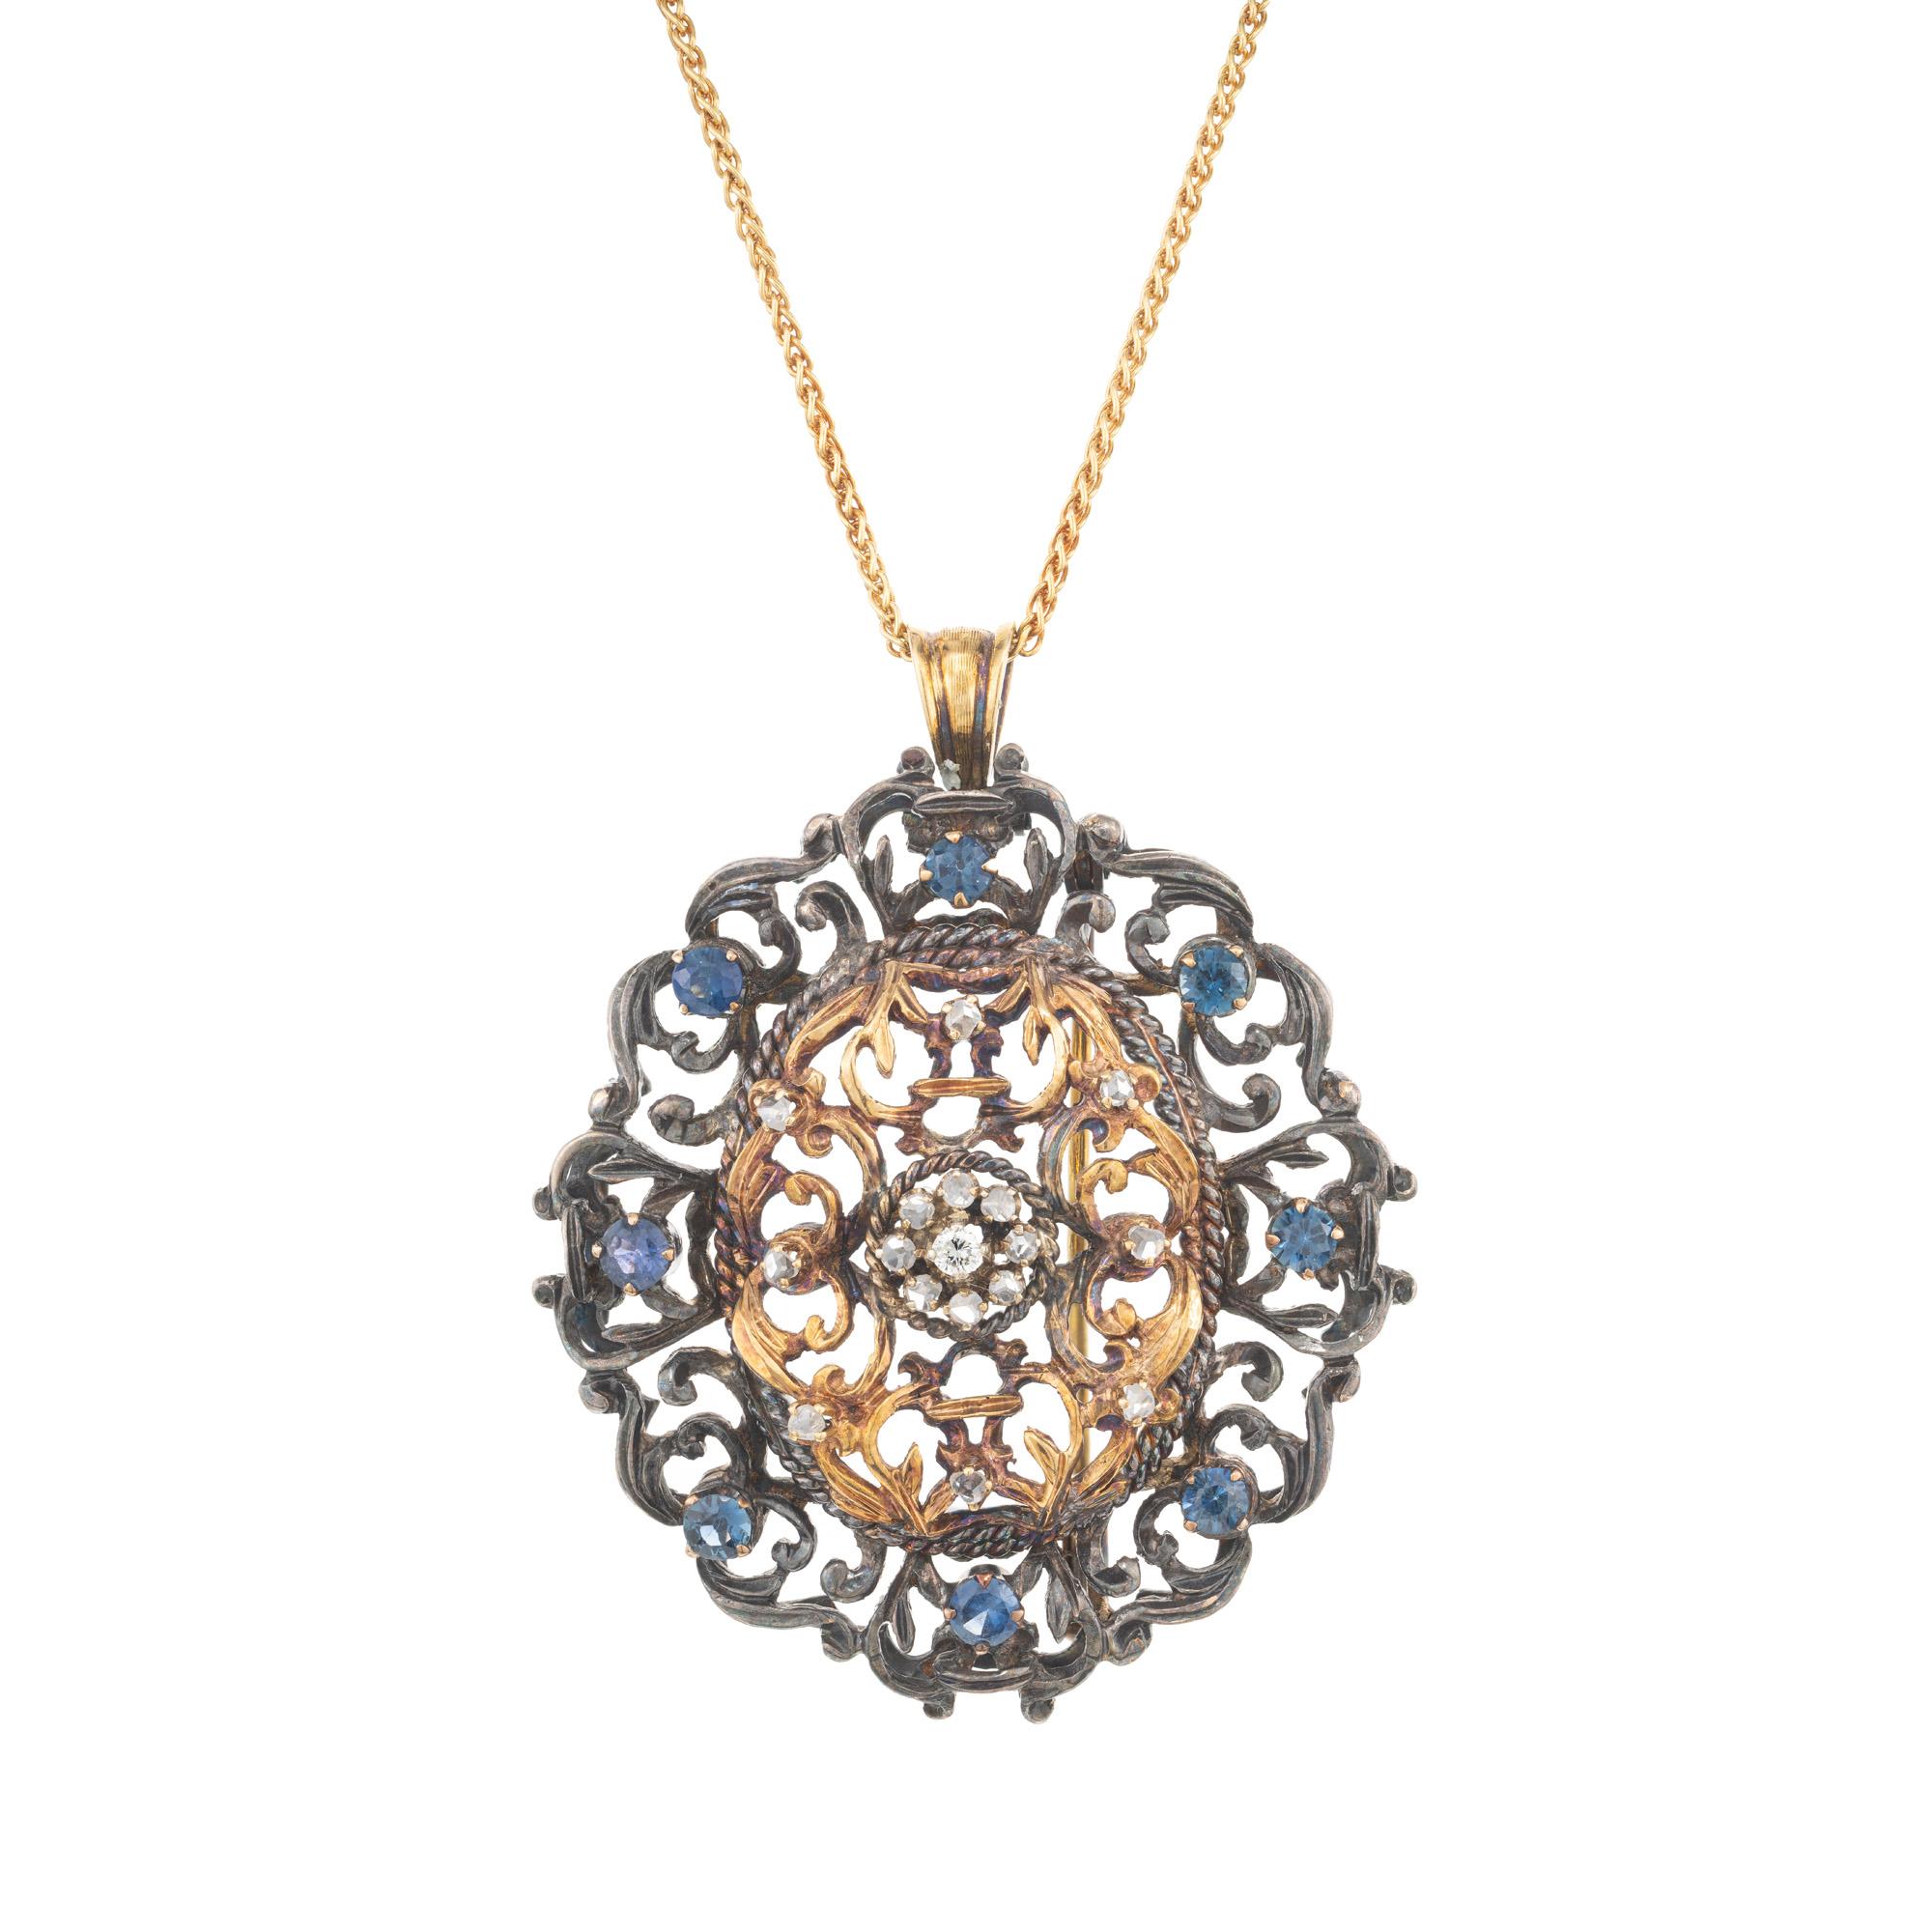 Spectacular 1920's Victorian Revival sapphire and diamond pendant, necklace and brooch. One old mine cut center diamond mounted in handmade 18k yellow gold and silver open work pendant. Amazing detail and craftsmanship adorned with 8 rose cut